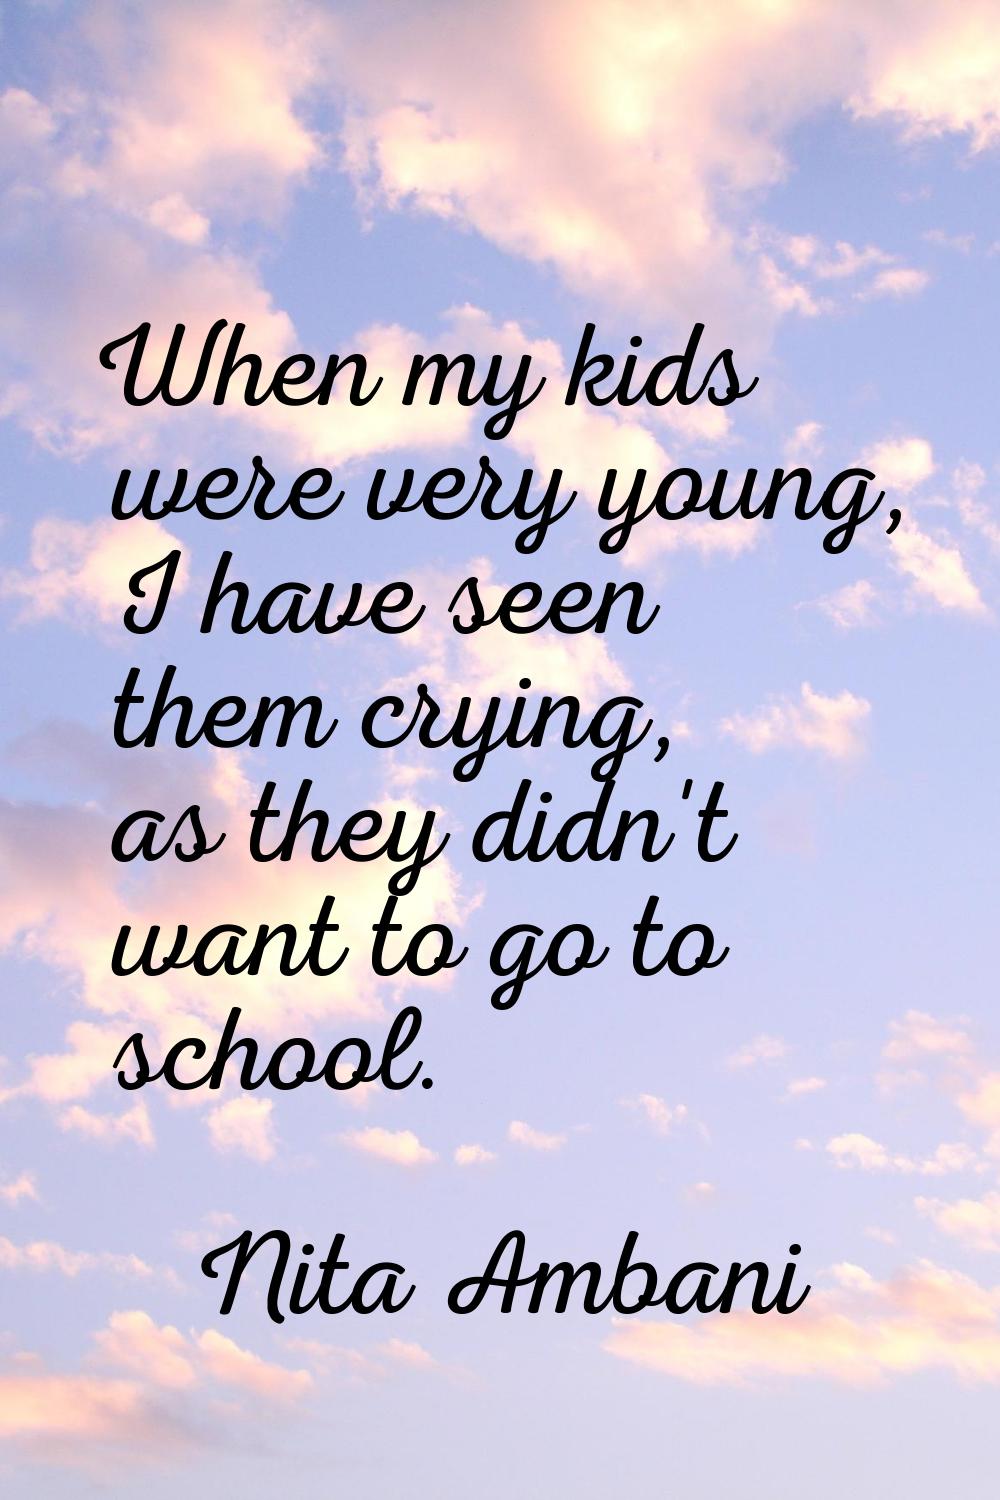 When my kids were very young, I have seen them crying, as they didn't want to go to school.